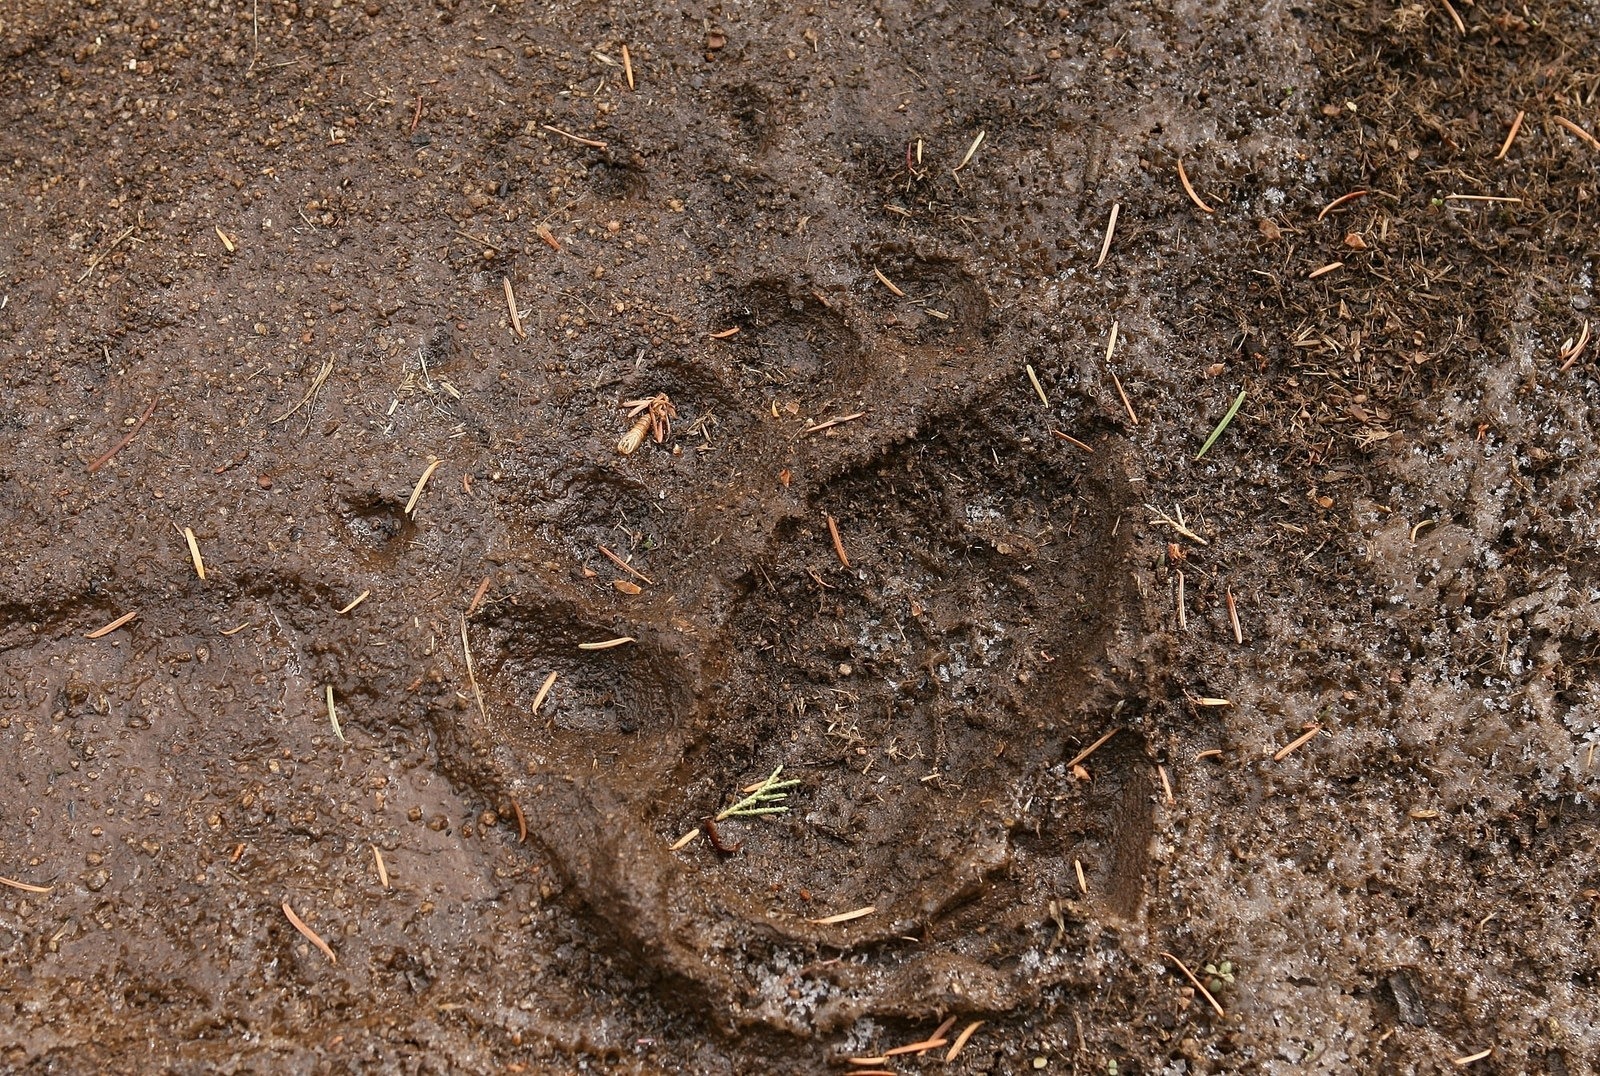 A grizzly track along the Yellowstone River Trail. Photo courtesy Jim Peaco/NPS